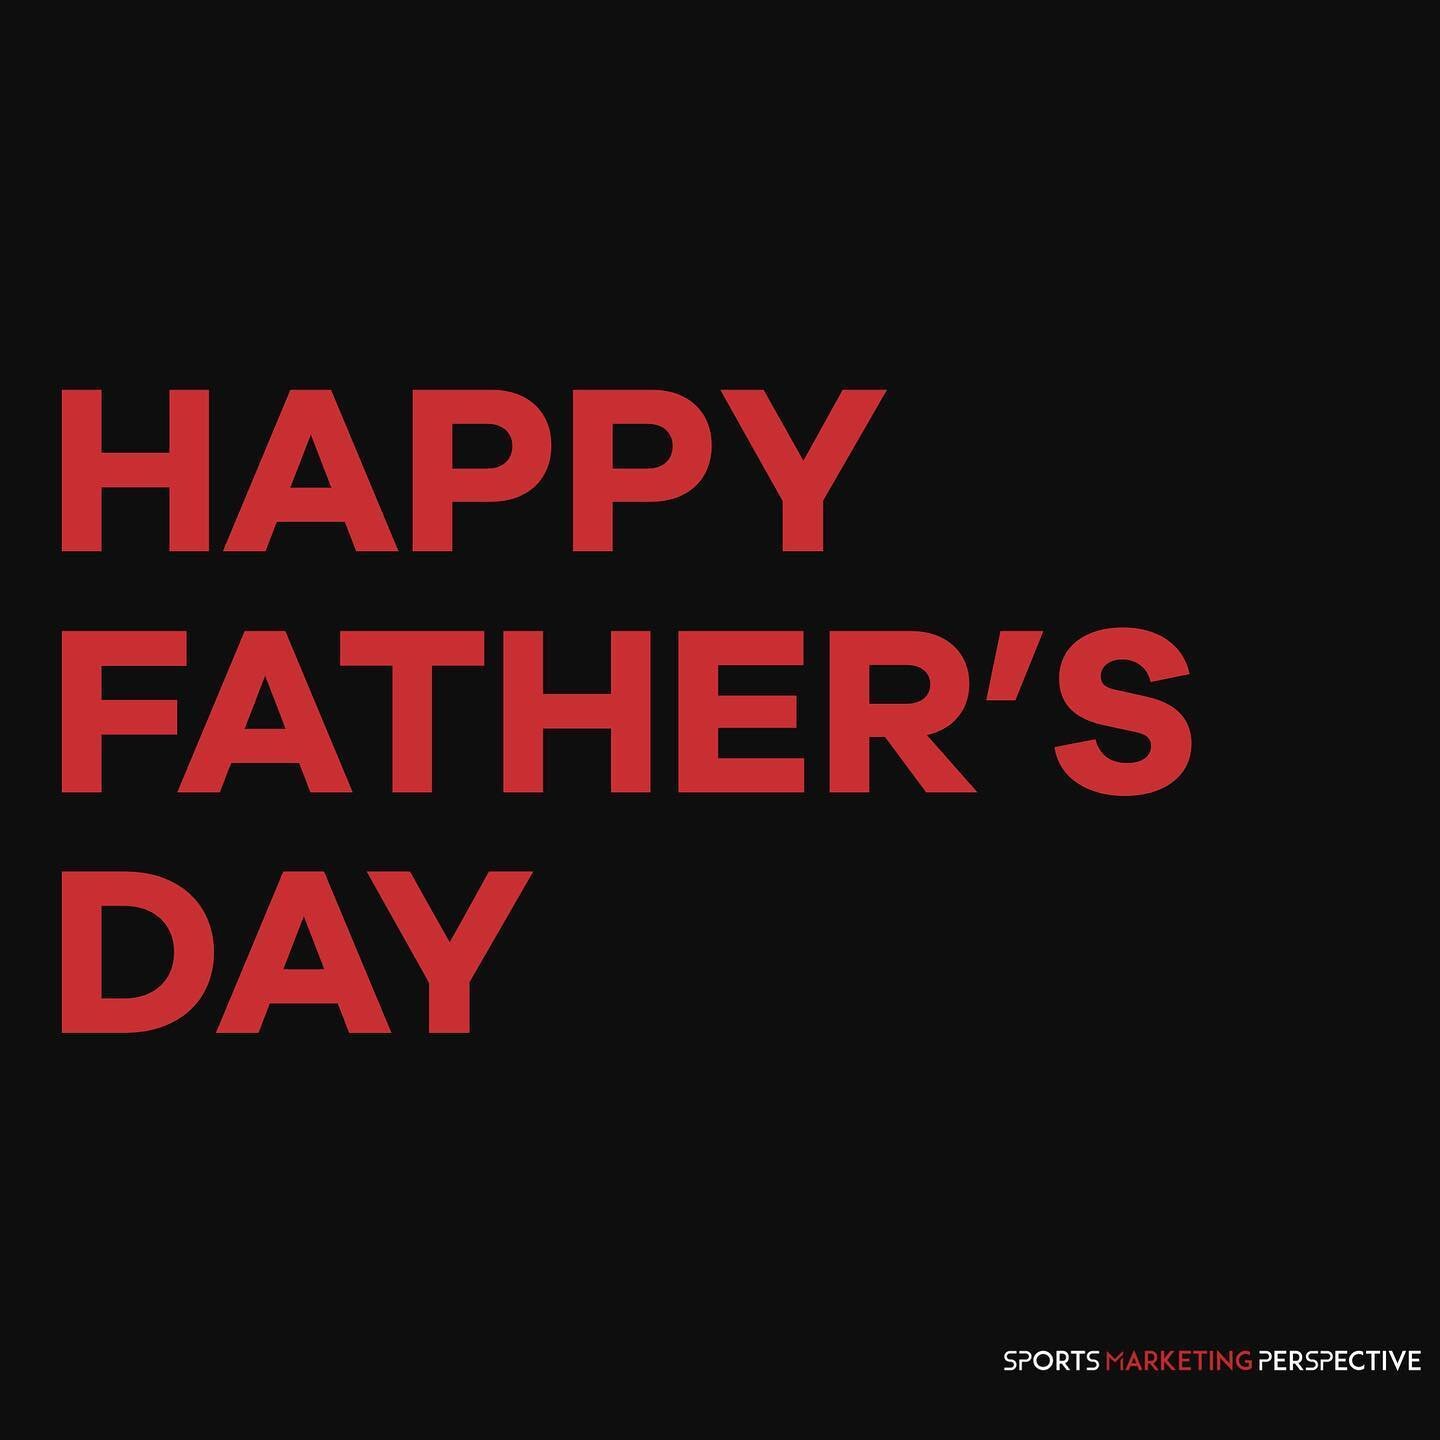 Happy Father&rsquo;s Day from Sports Marketing Perspective!
#HappyFathersDay